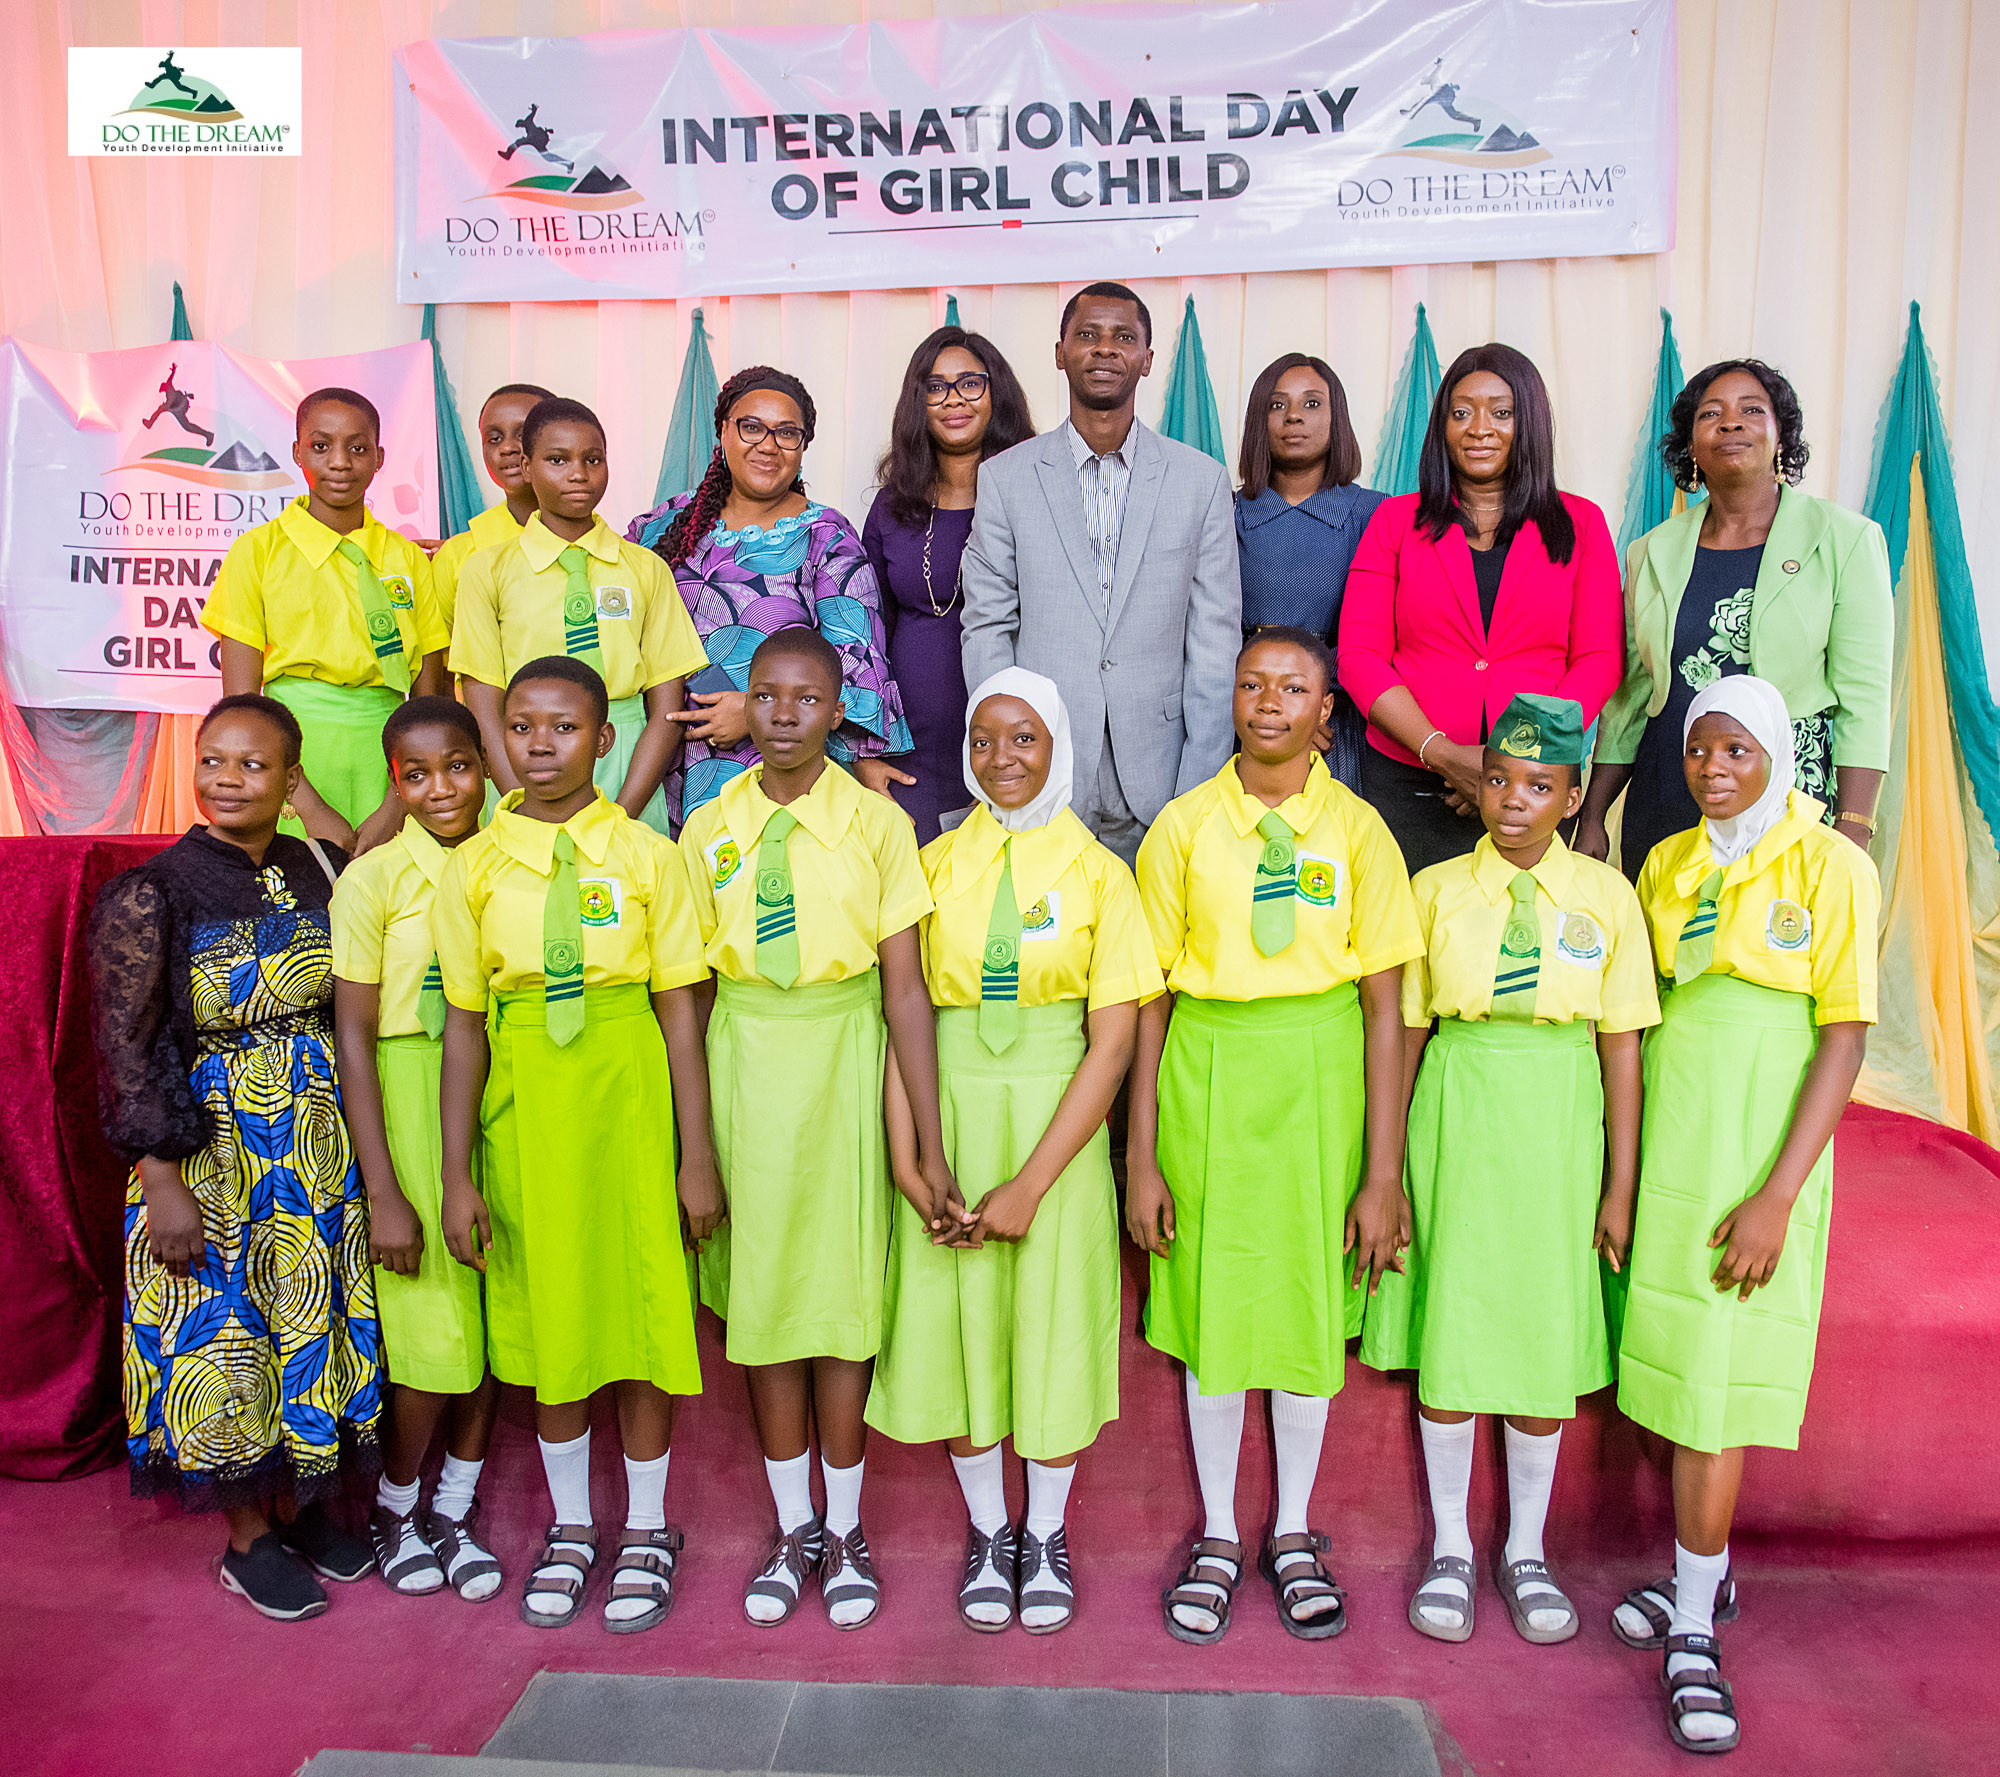 International Day of Girl Child www.dothedreamydi.org 950.jpg Girls Are Asset Project 8229